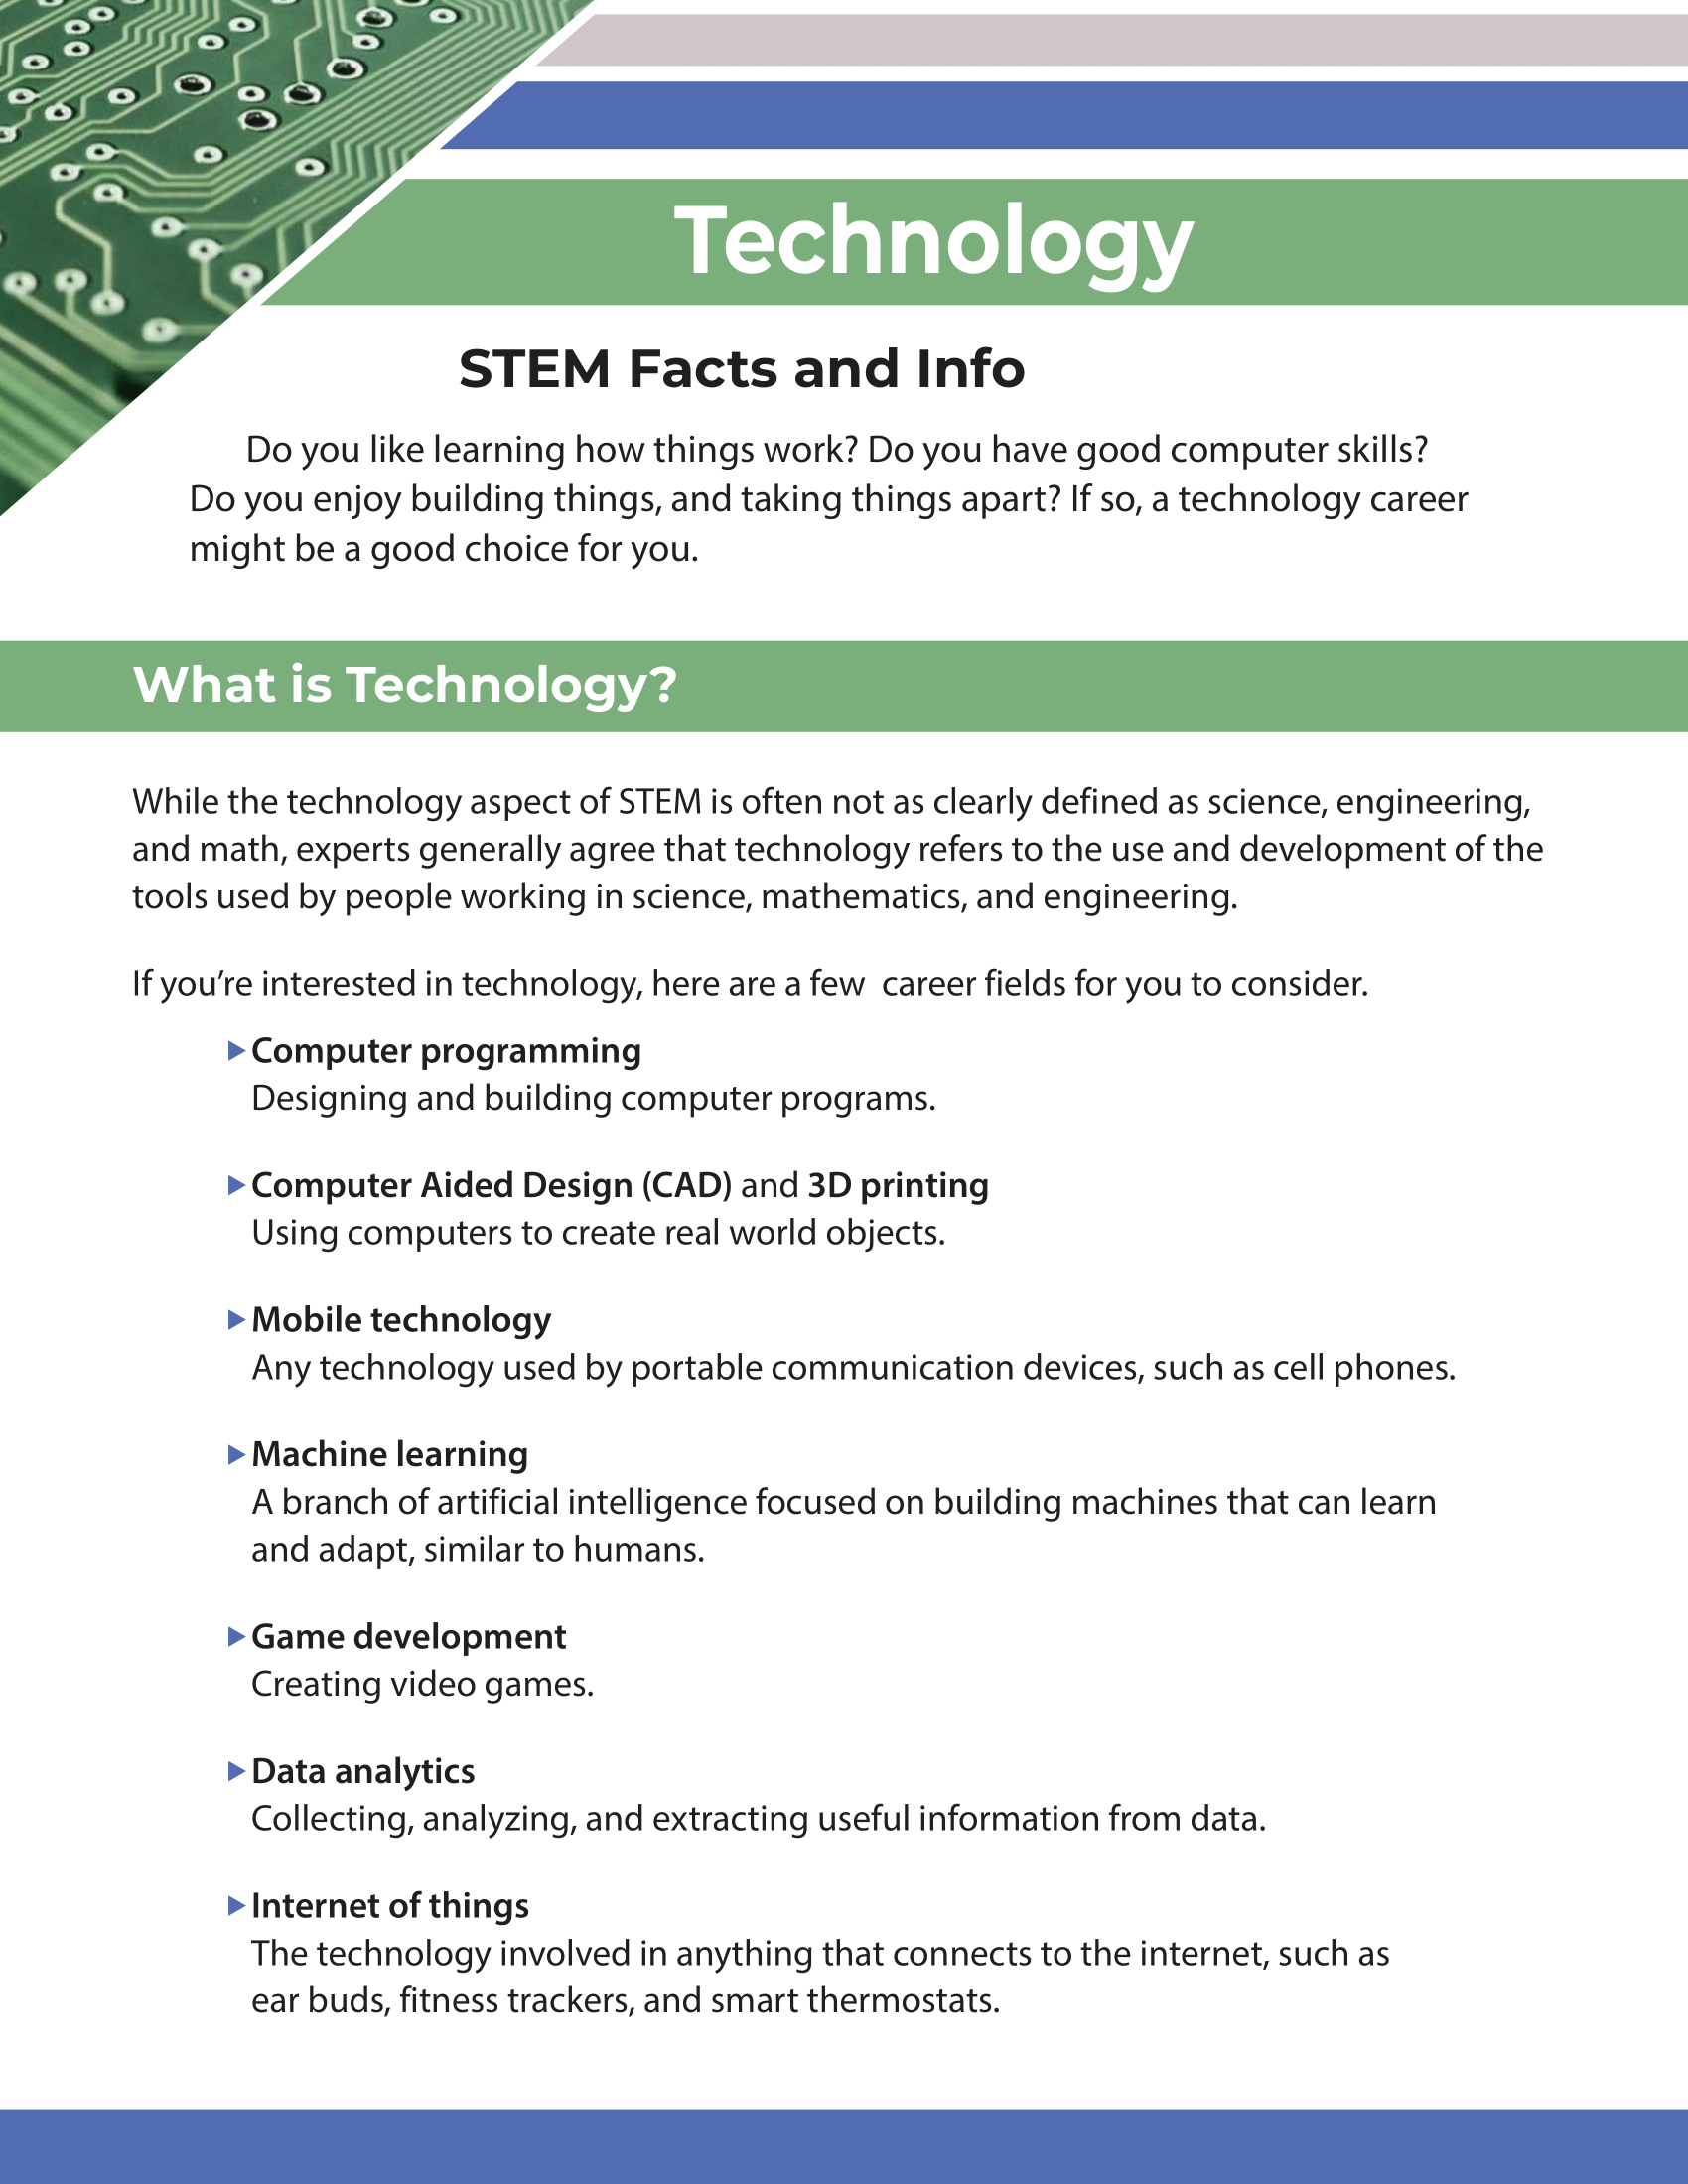 STEM Facts and Info - Technology